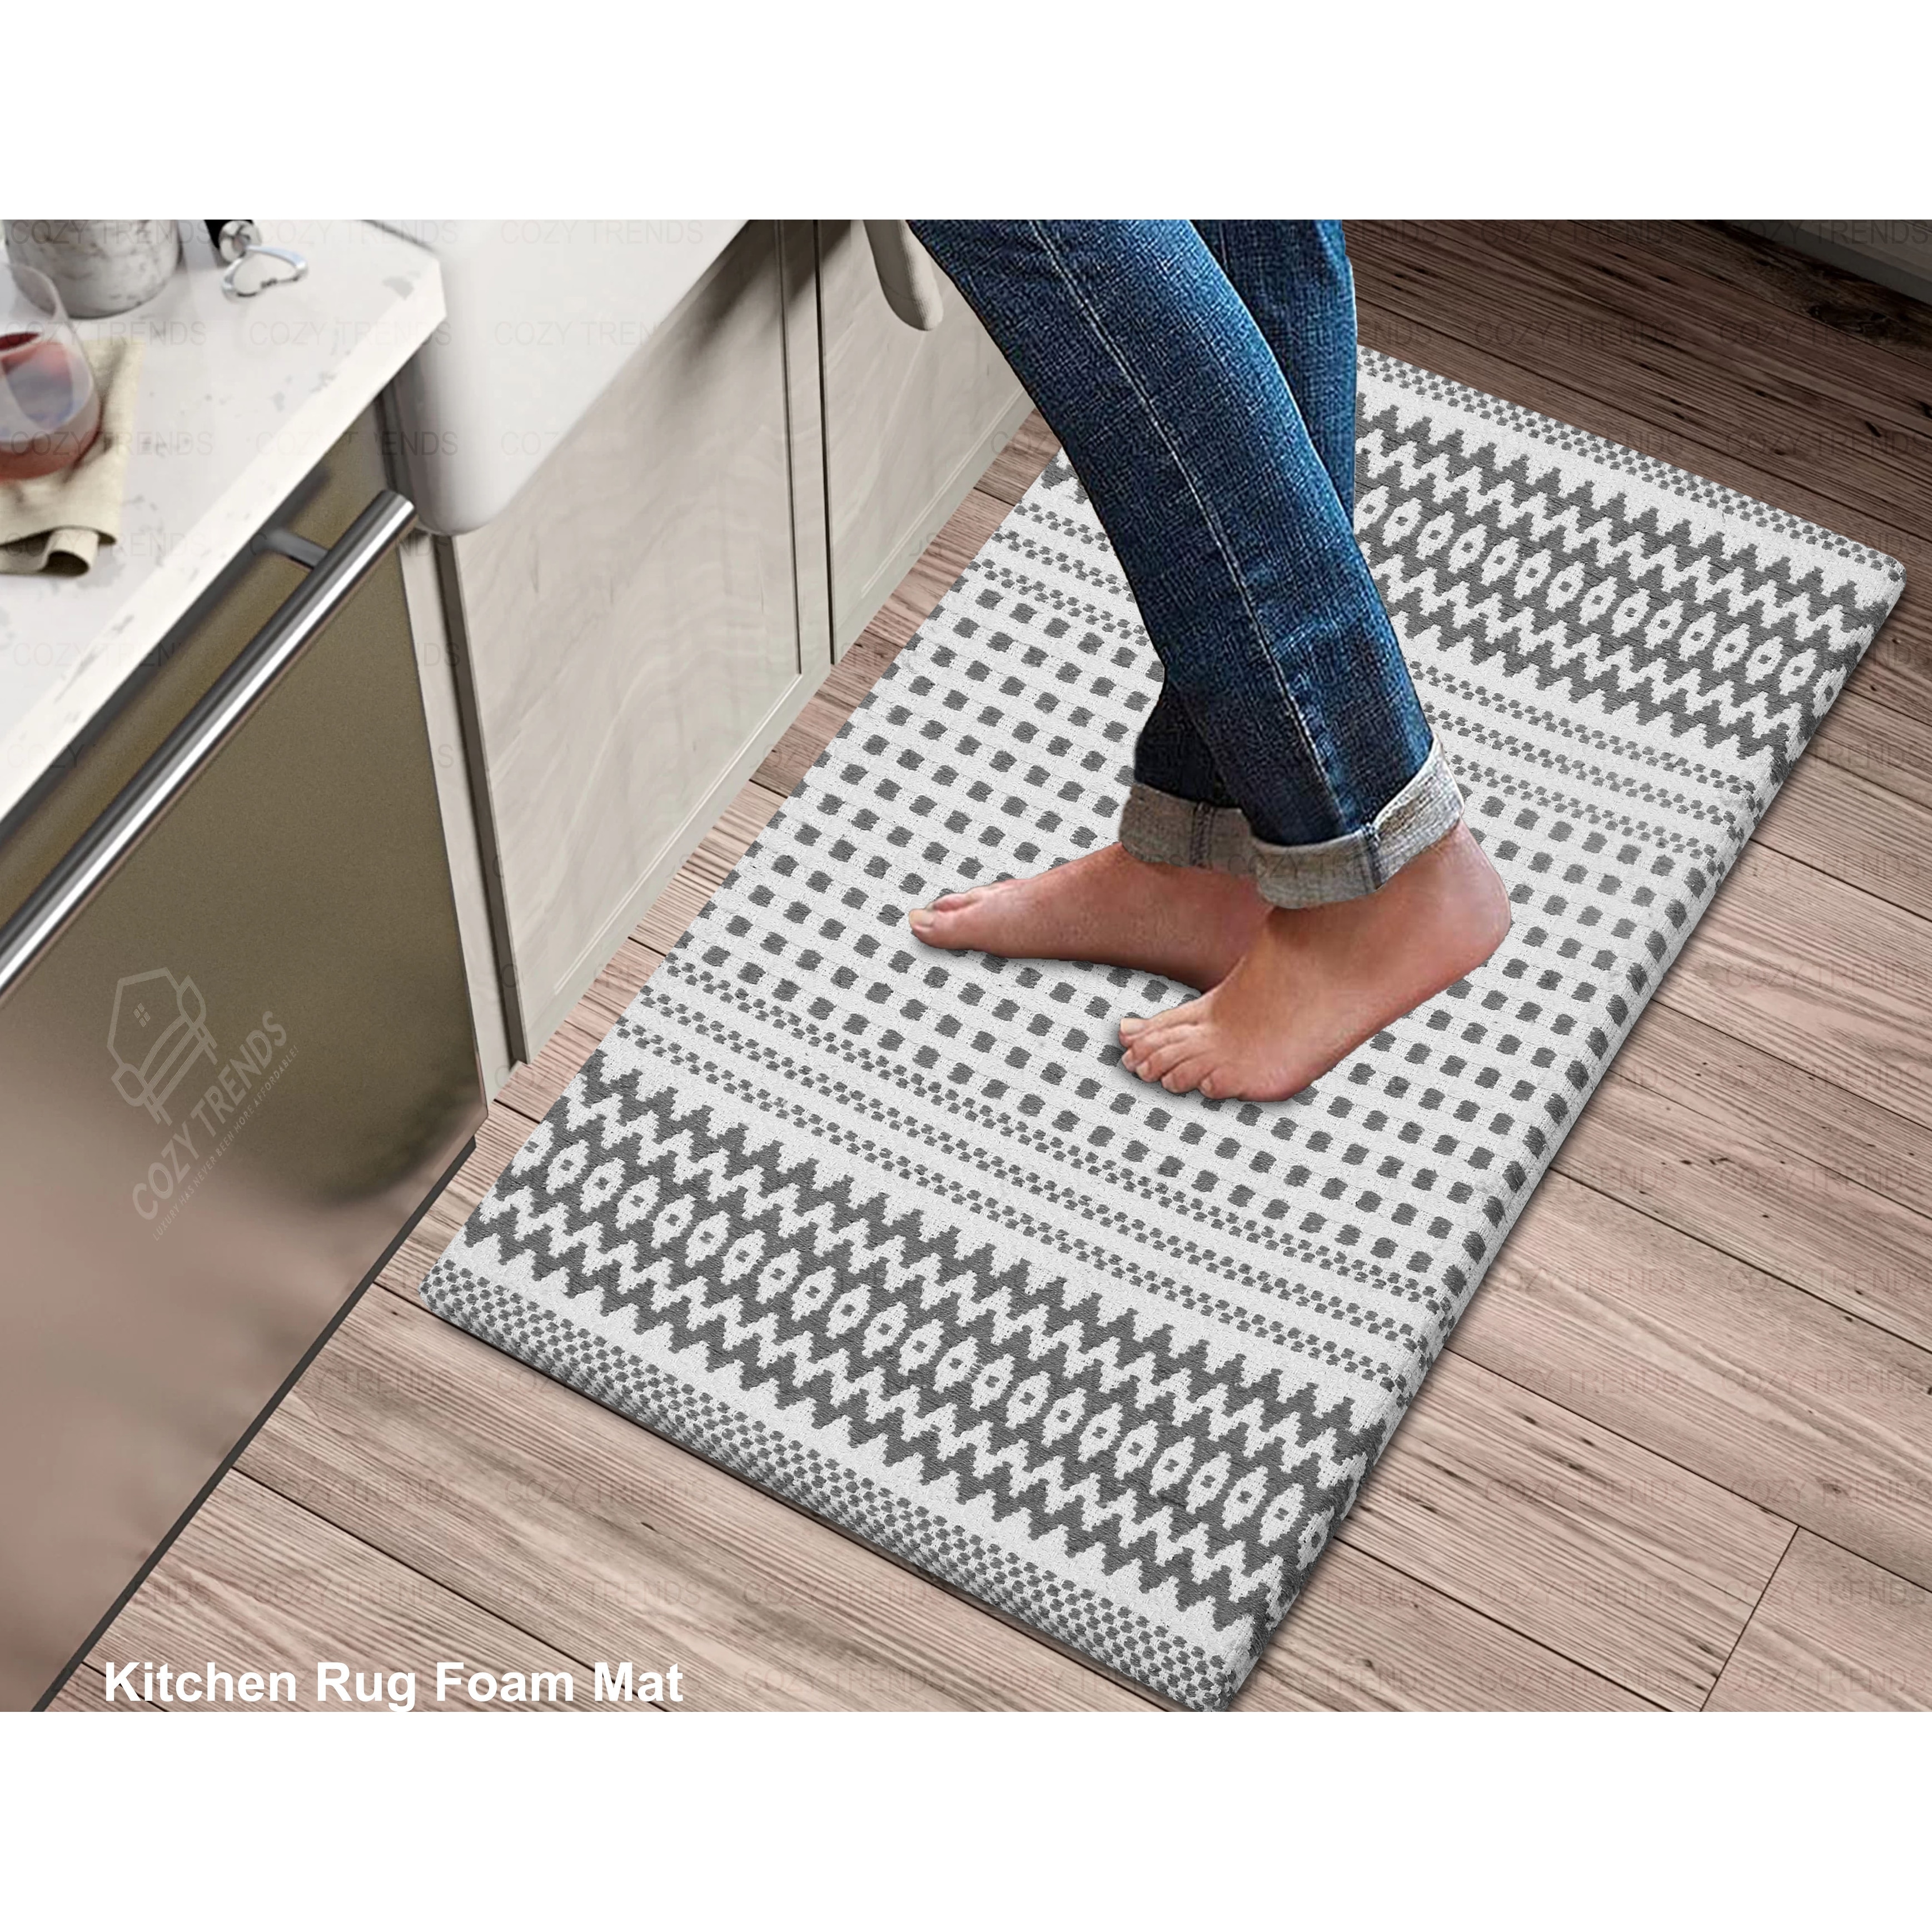 https://ak1.ostkcdn.com/images/products/is/images/direct/970b2de1410b0af8d85c9af53a9999eee66add74/Woven-Cotton-Anti-Fatigue-Cushioned-Kitchen-%7C-Doormat-%7C-Bathroom-18%22-x-30%22-Mats-With-Foam-Backing-Anti-Slip.jpg